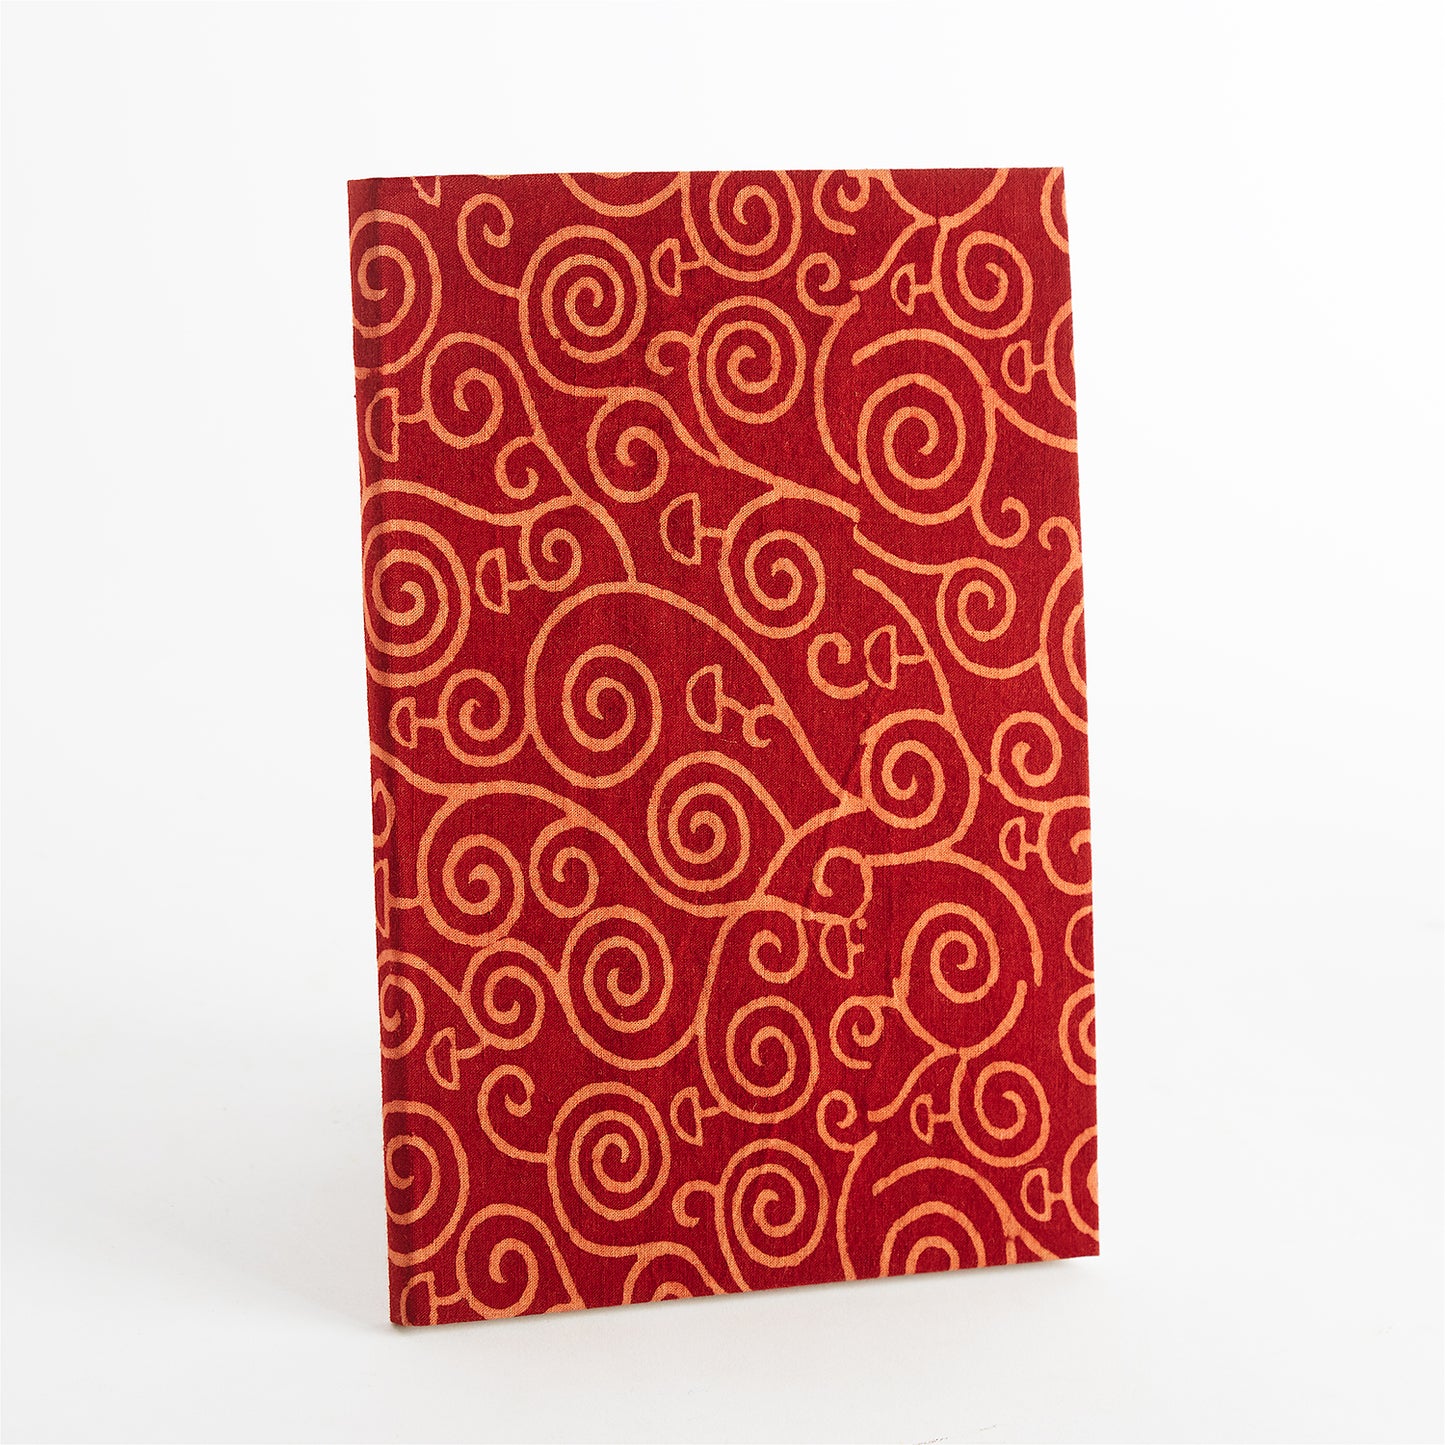 Cherry Red Color with Ethnic Design - Regular Size Diary